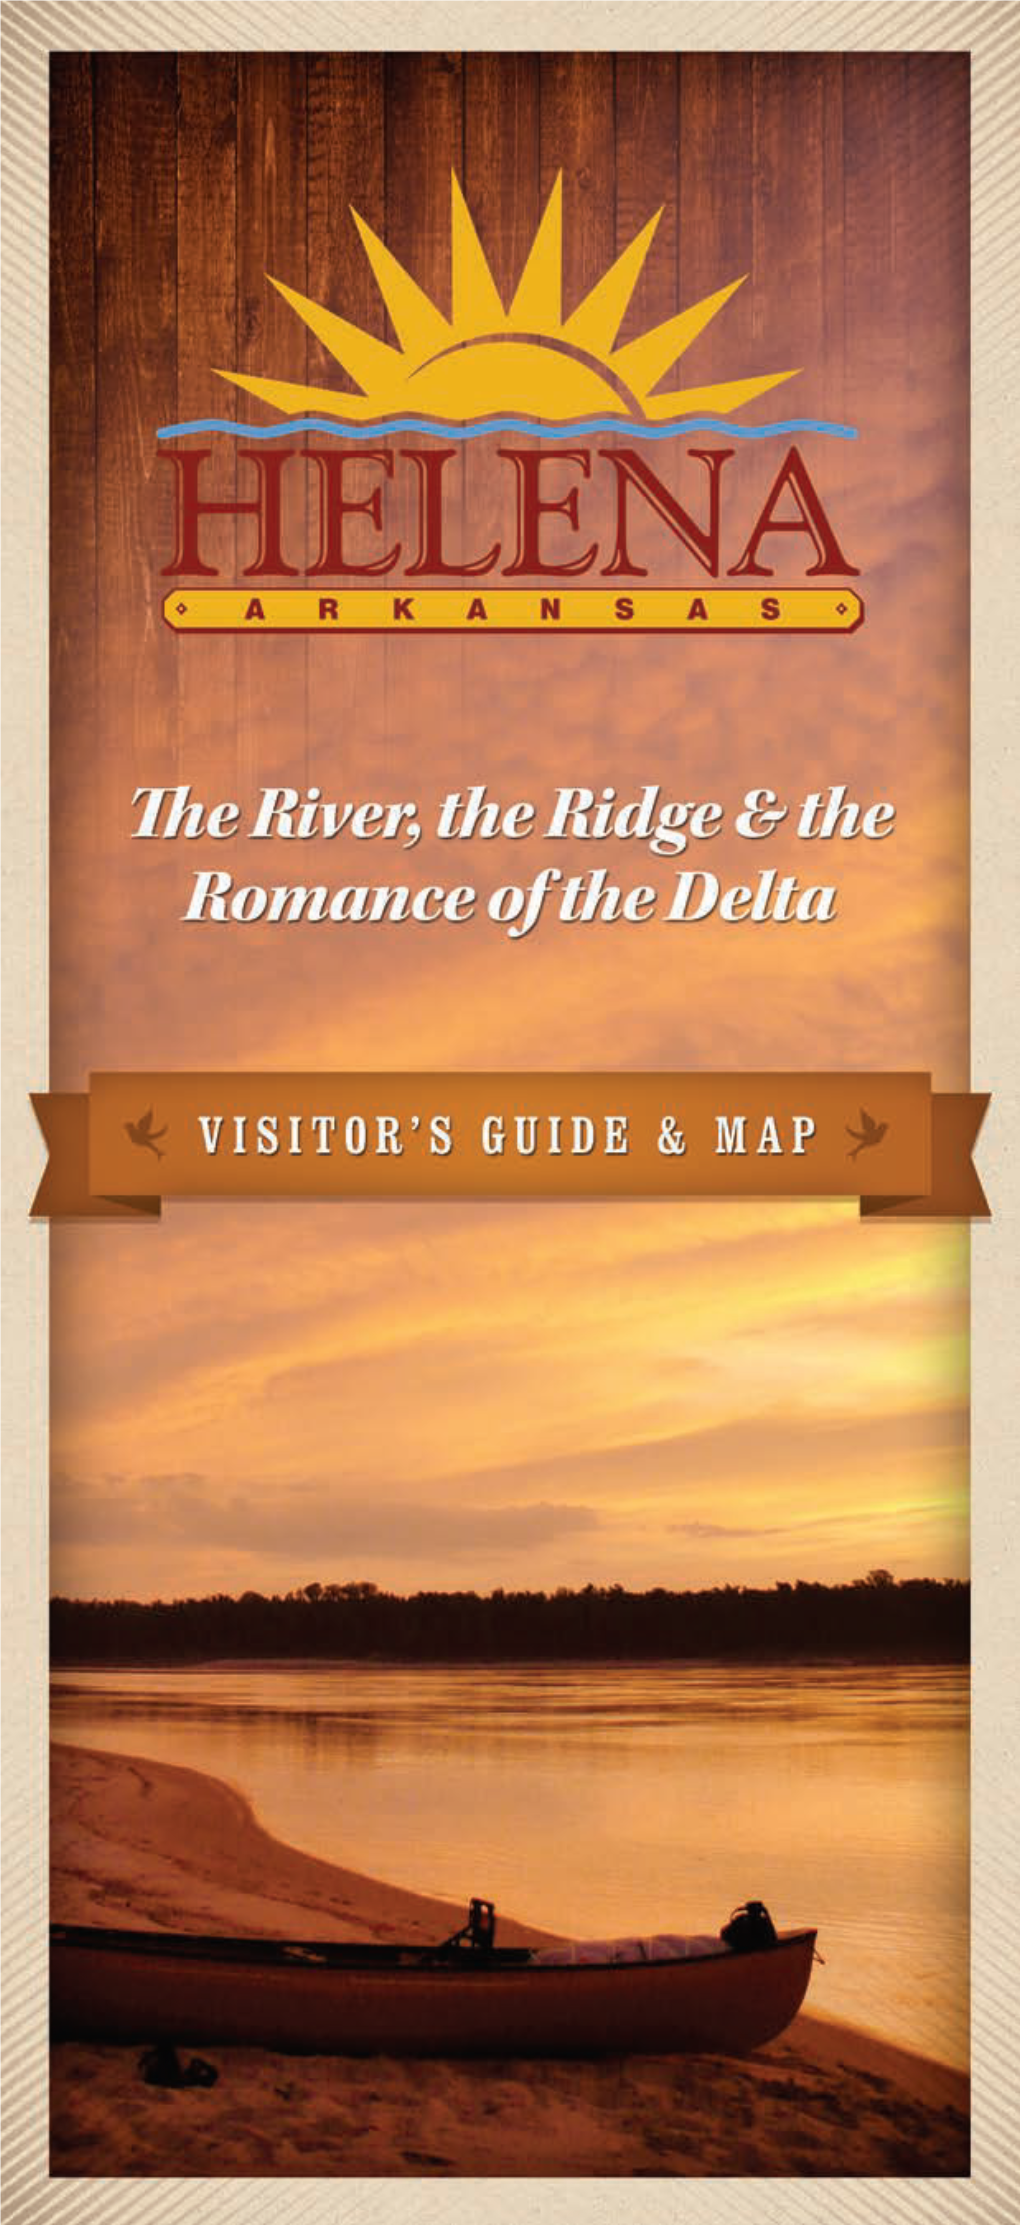 Download a Visitor's Guide (PDF)